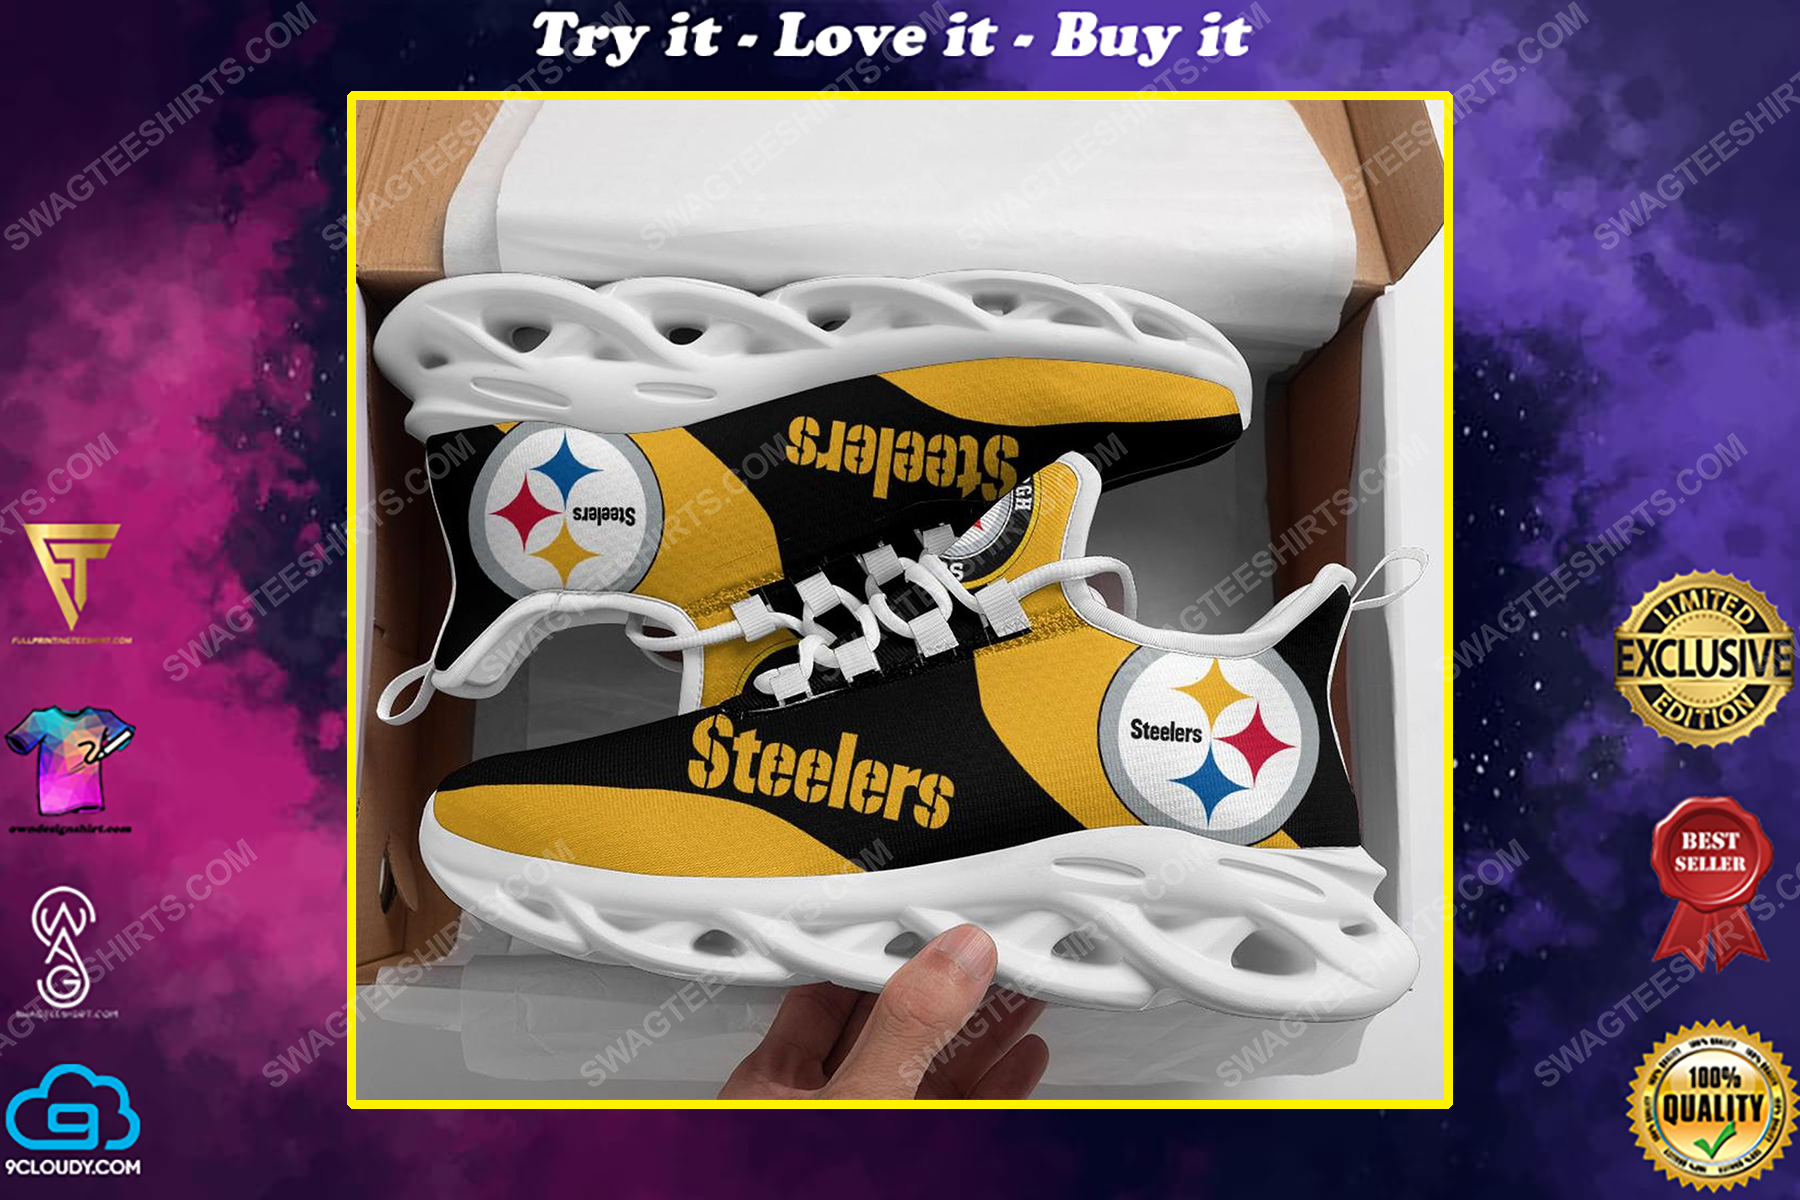 The pittsburgh steelers football team max soul shoes